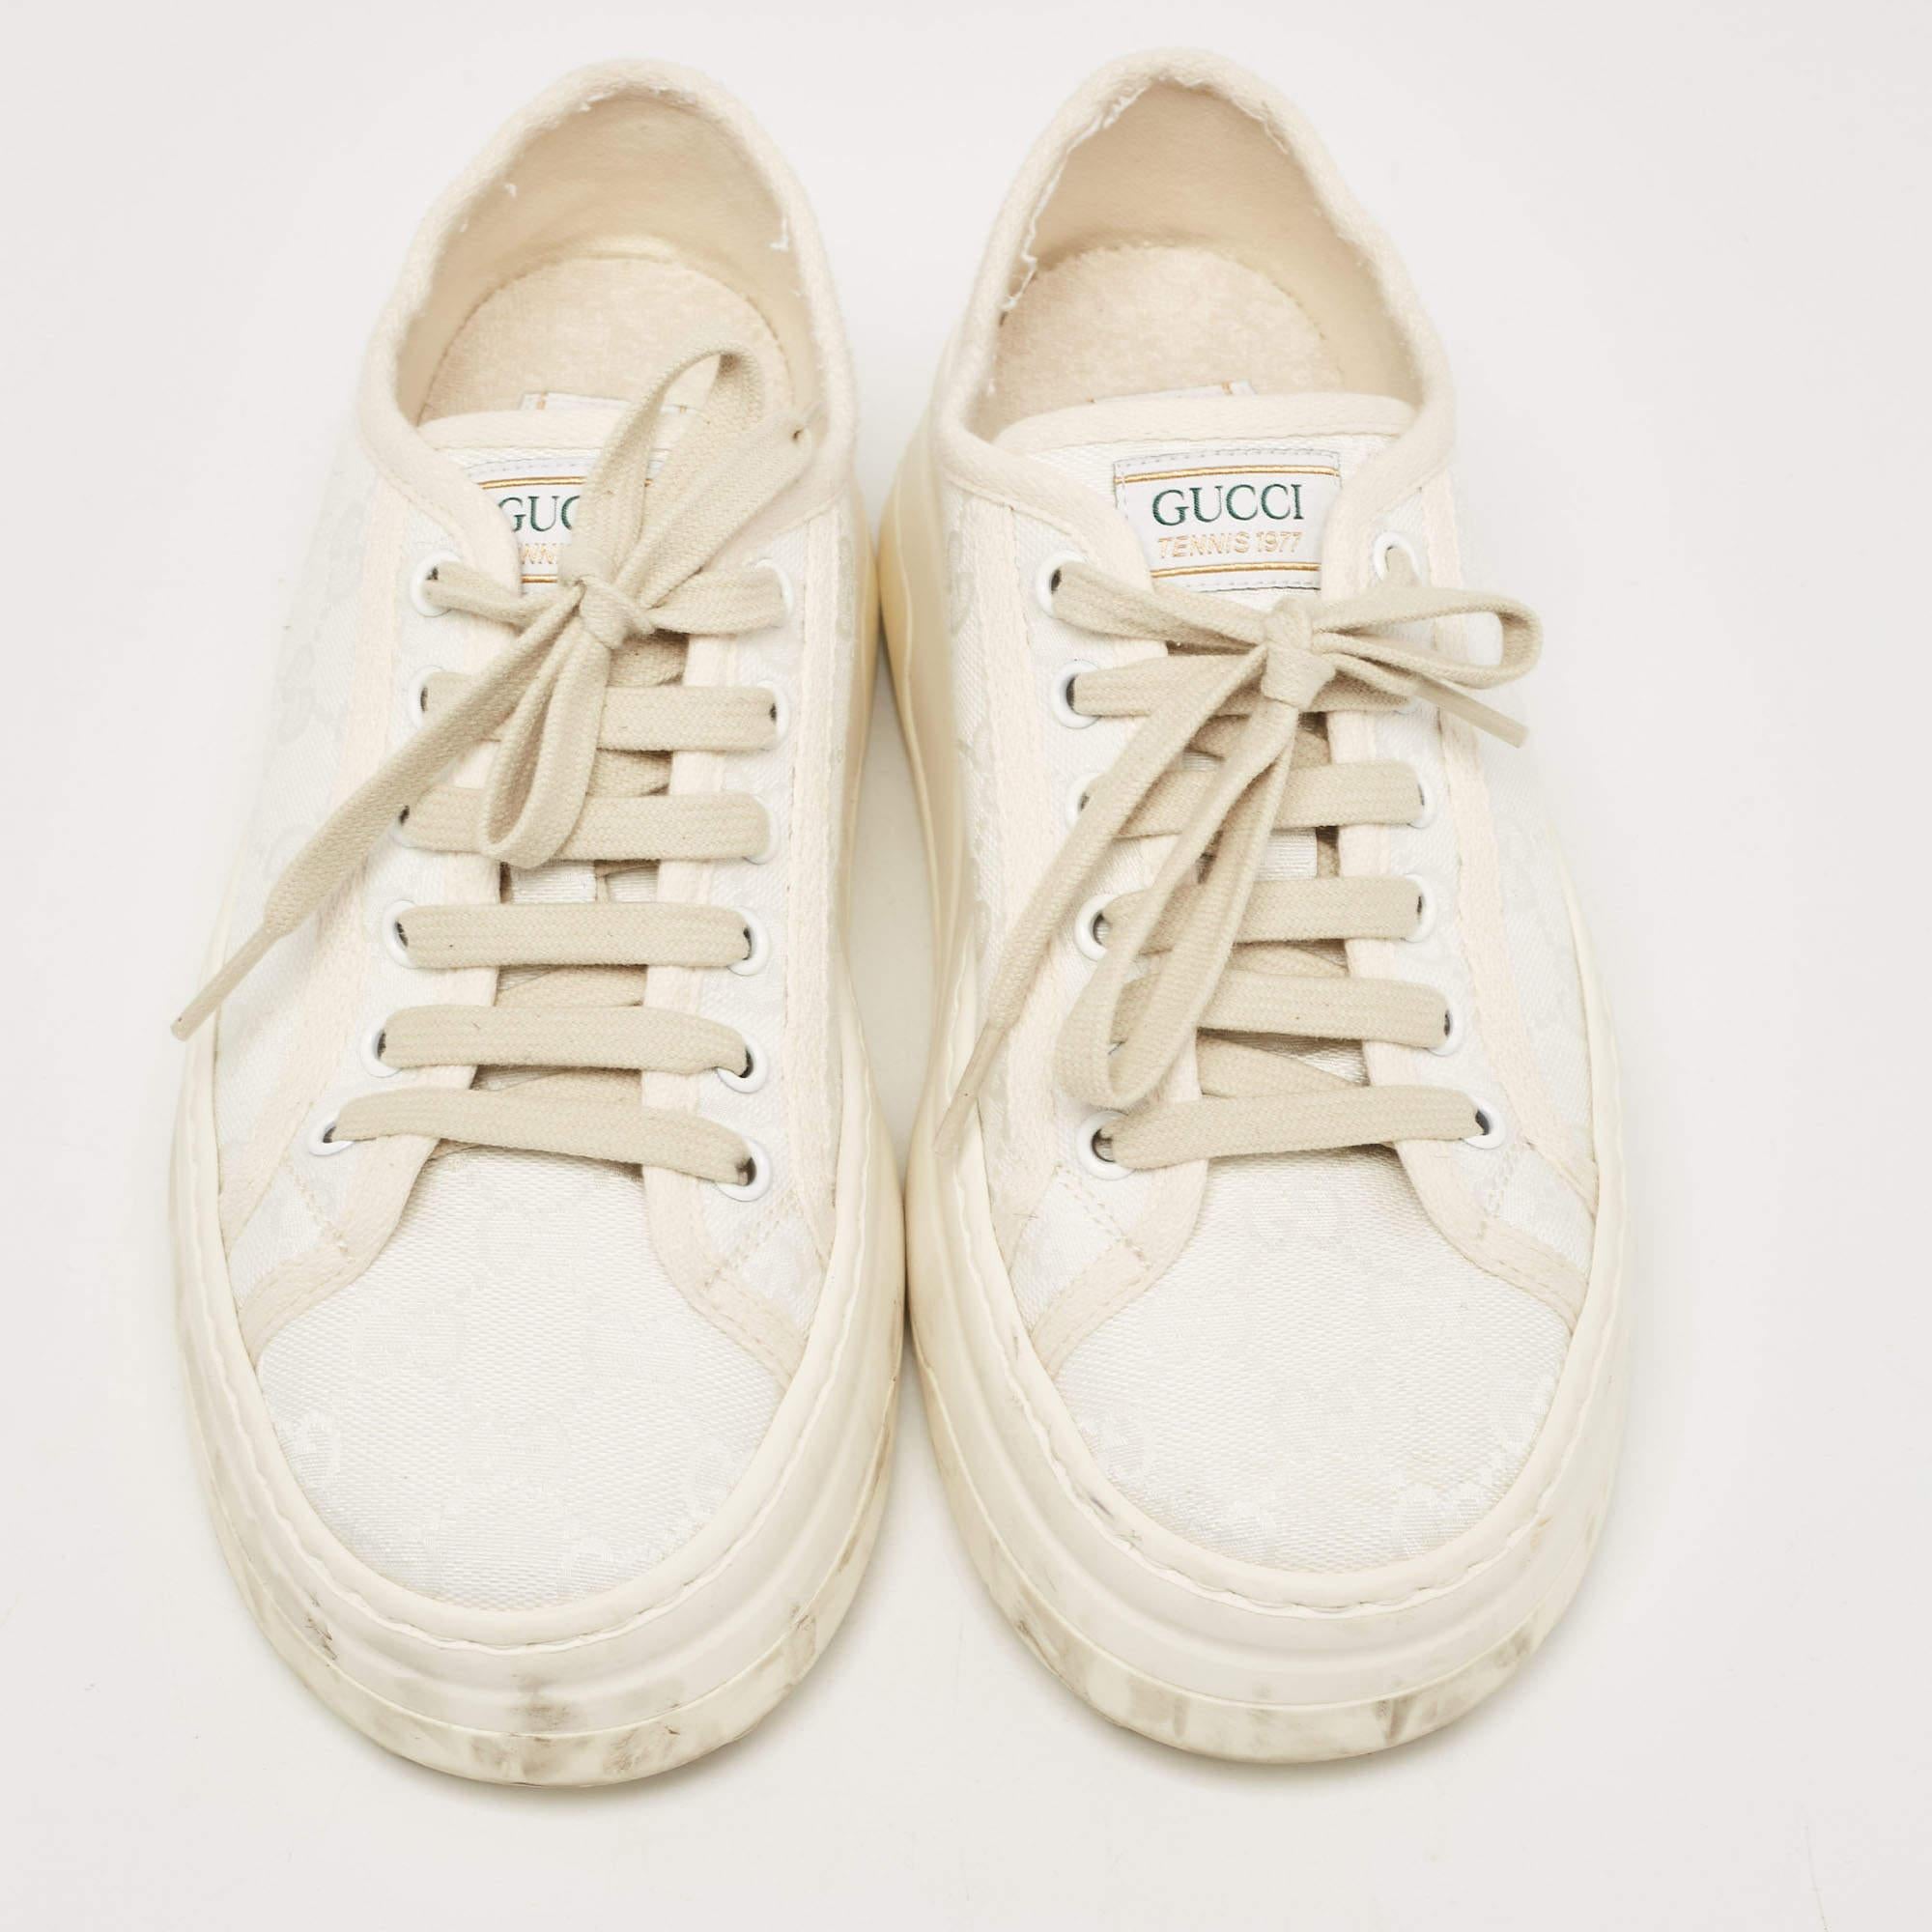 Packed with style and comfort, these Gucci sneakers are gentle on the feet so that you can glide through the day. They have a sleek upper with lace closure, and they're set on durable rubber soles.

